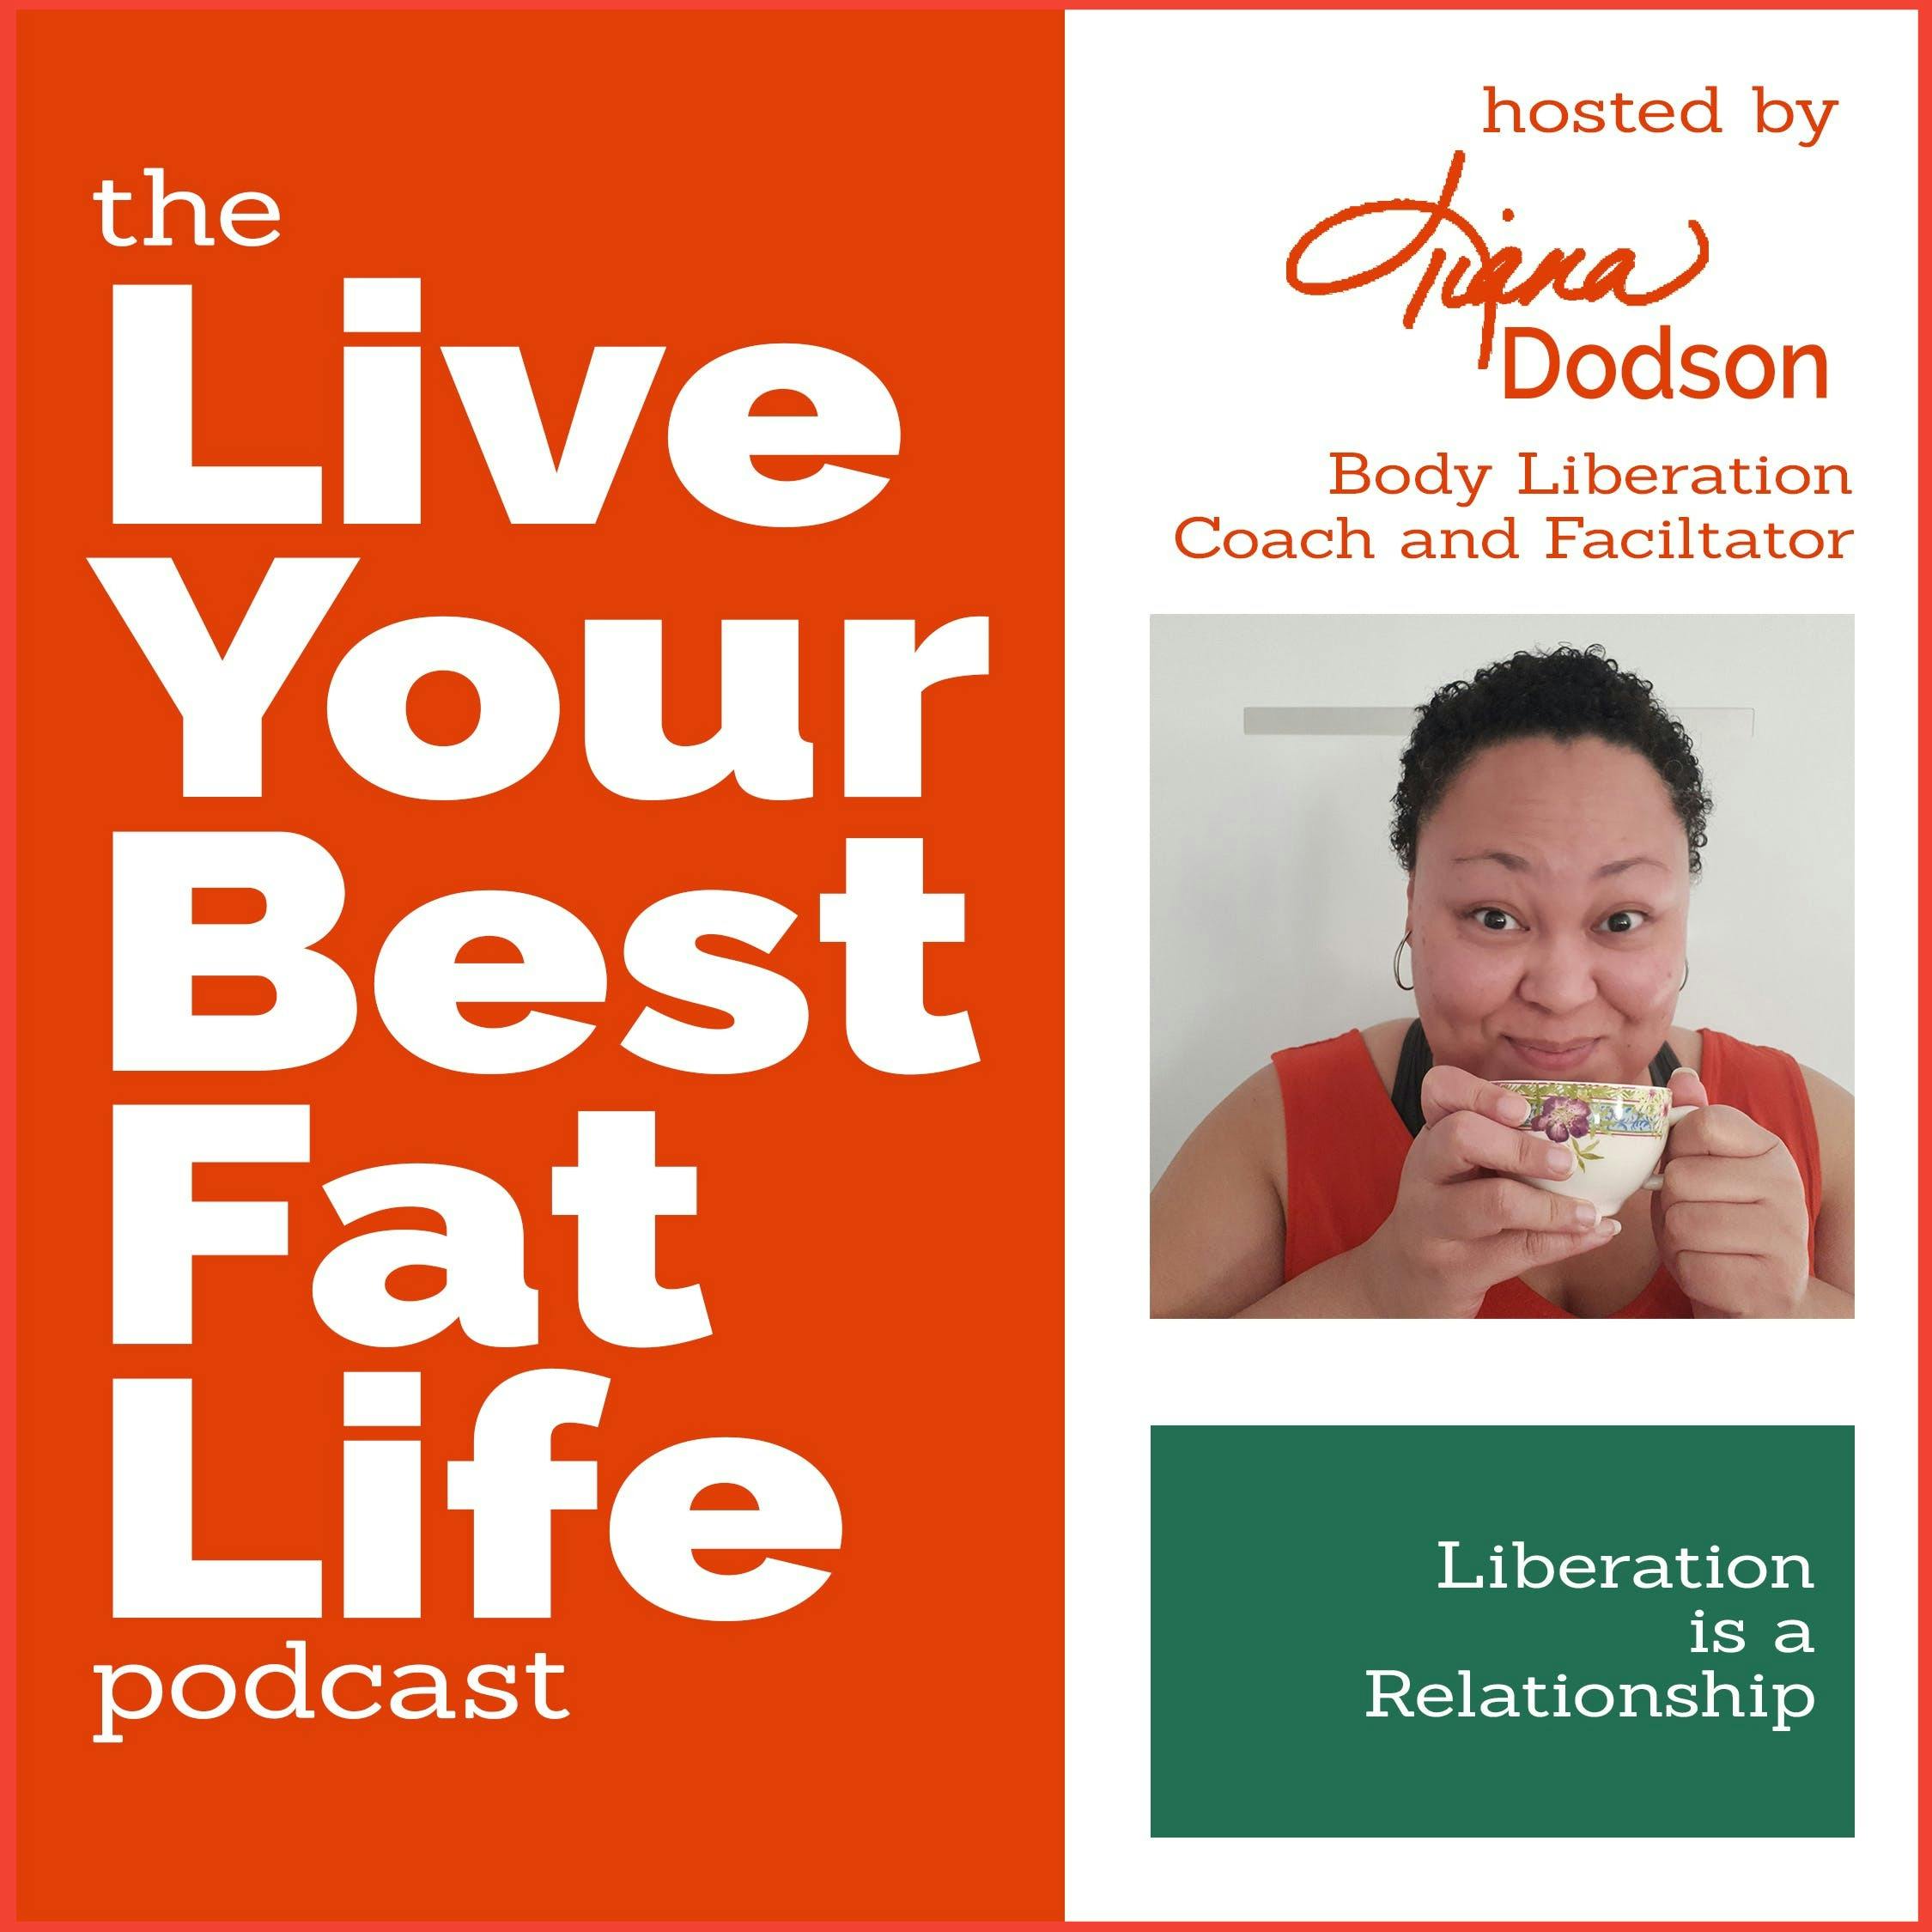 New Podcast Episode: Liberation is a Relationship